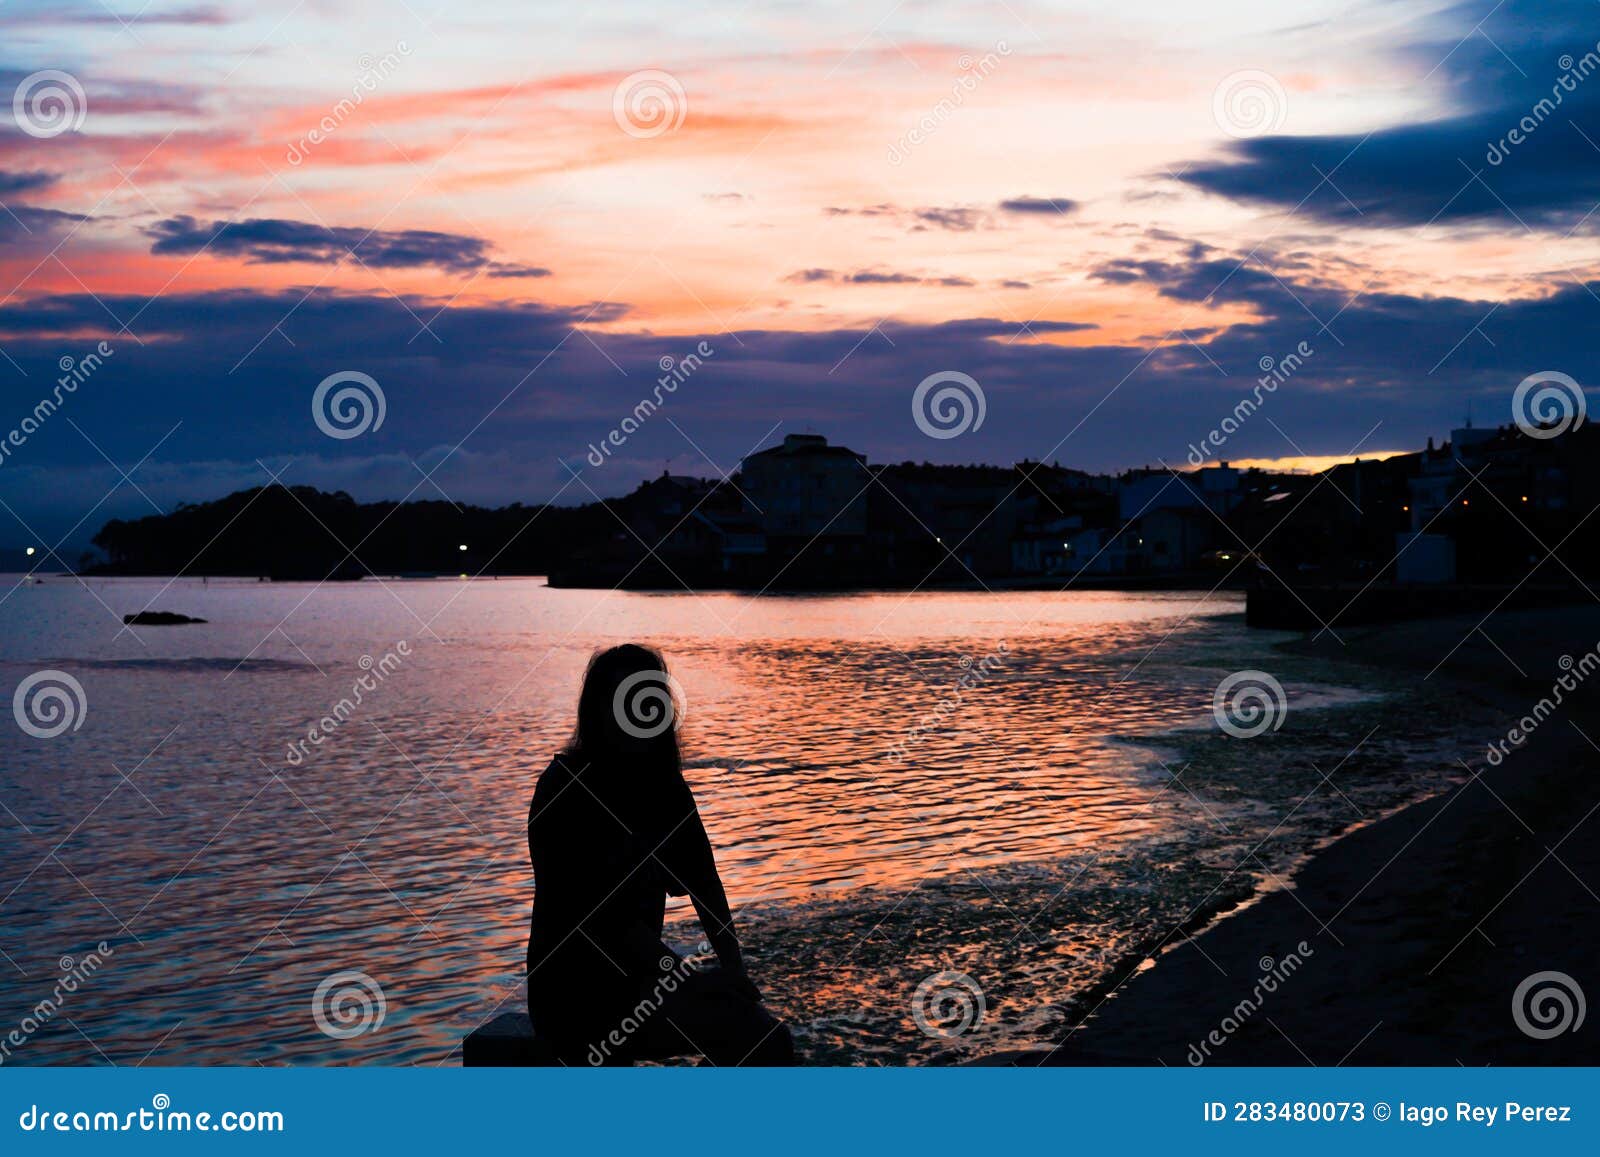 silhouette of a woman watching a beautiful view of a coast town on a sunset